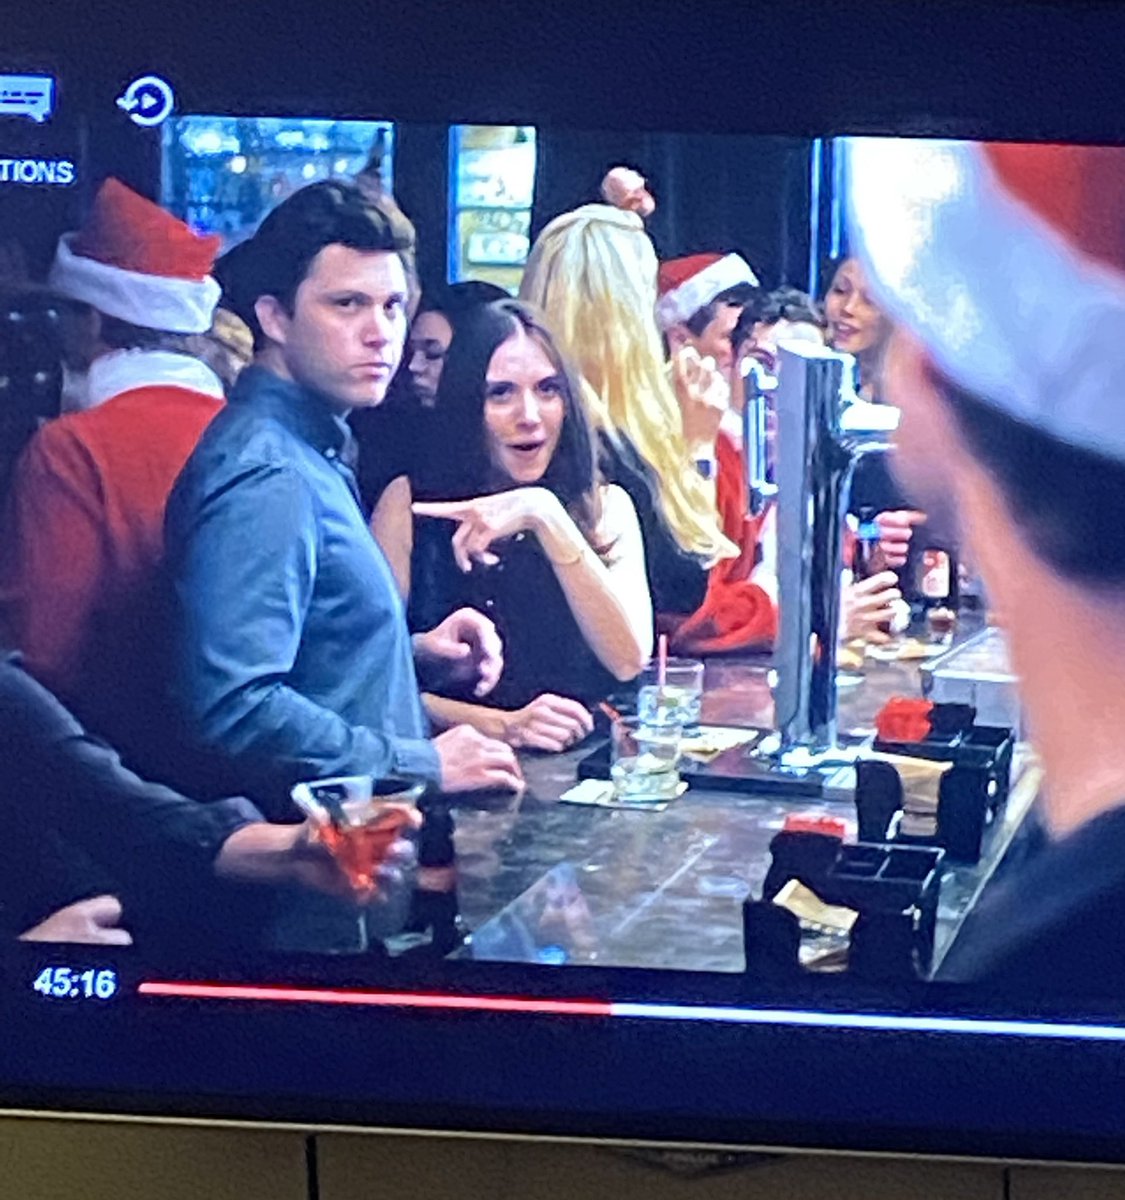 I’M WATCHING A MOVIE THAT I LOVED BACK IN MY THIRD YEAR OF UNI CIRCA 2018 AND SUDDENLY COLIN JOST IS THERE TOO?????? I have no memory of him bein in it (then again I didn’t know who he was back then) https://t.co/g5roOIt8Y8